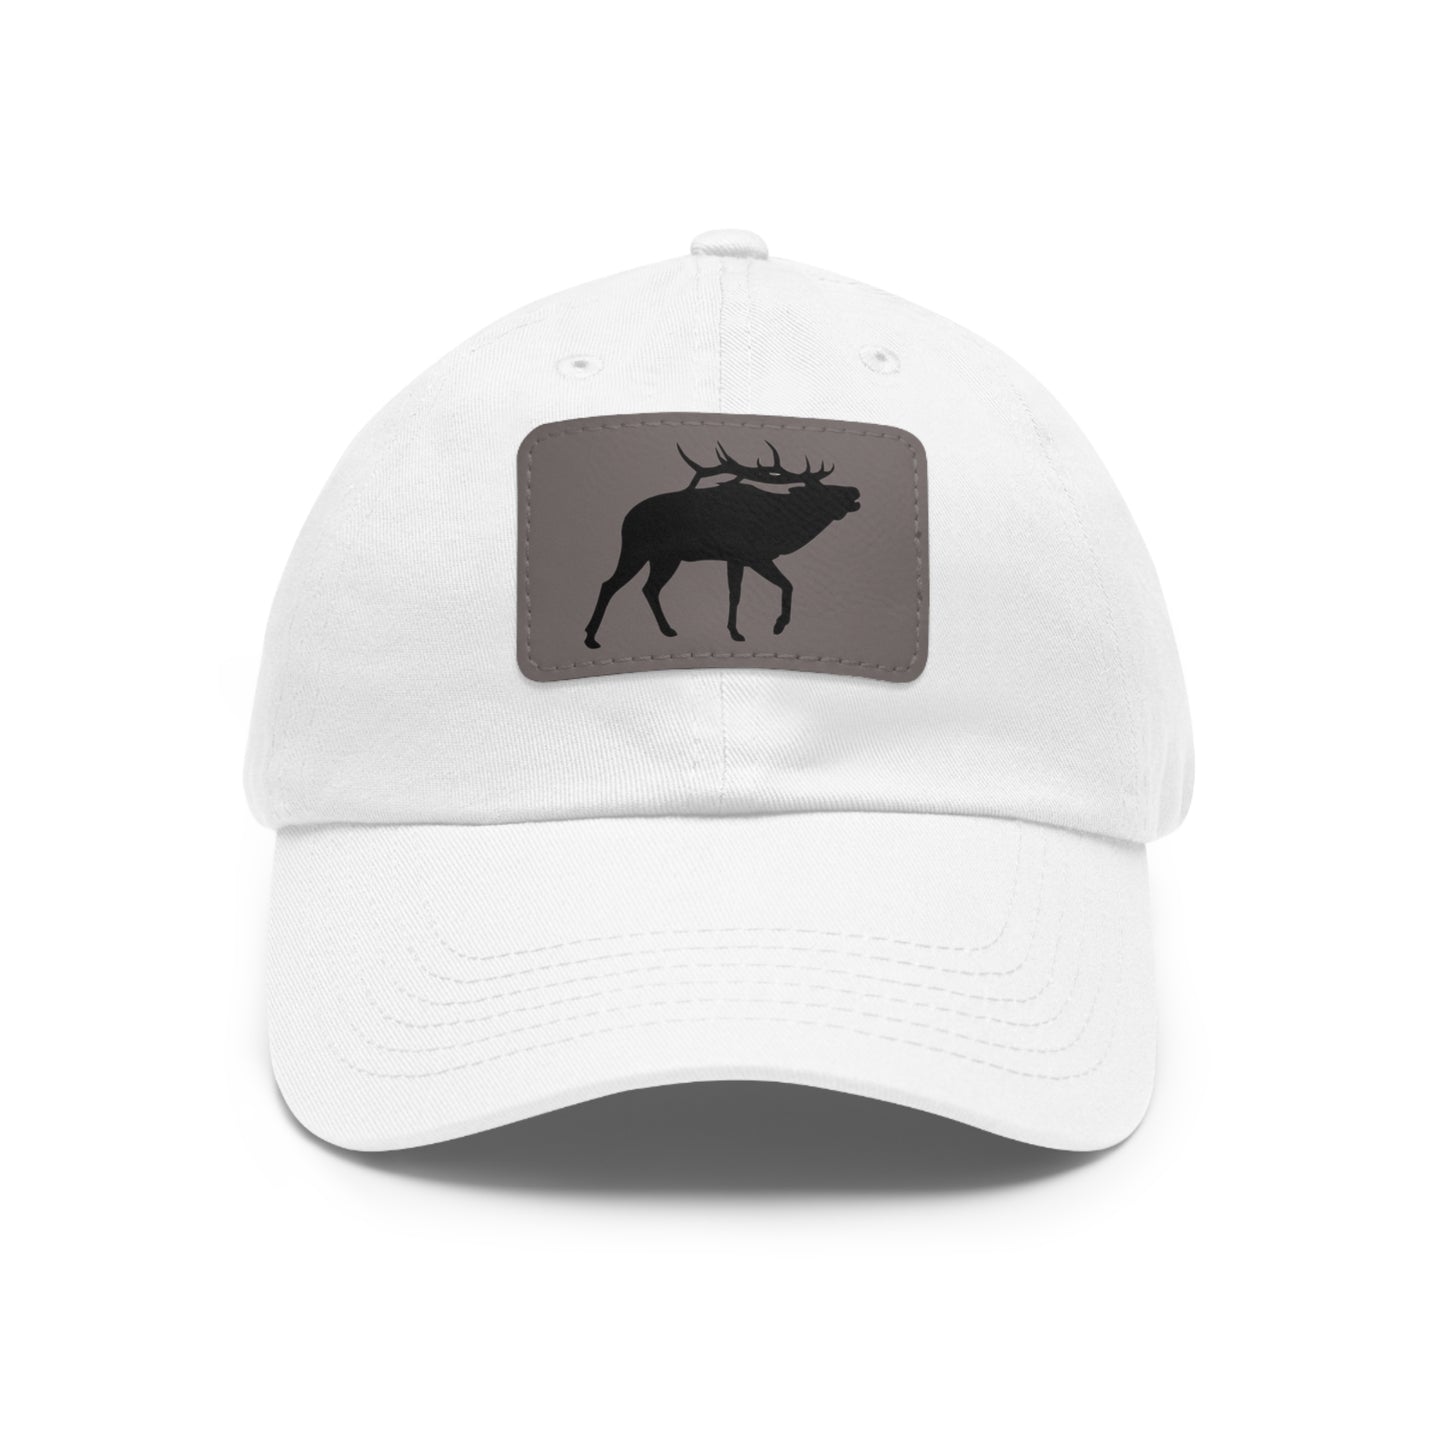 Elk hat with Leather Patch (Rectangle)